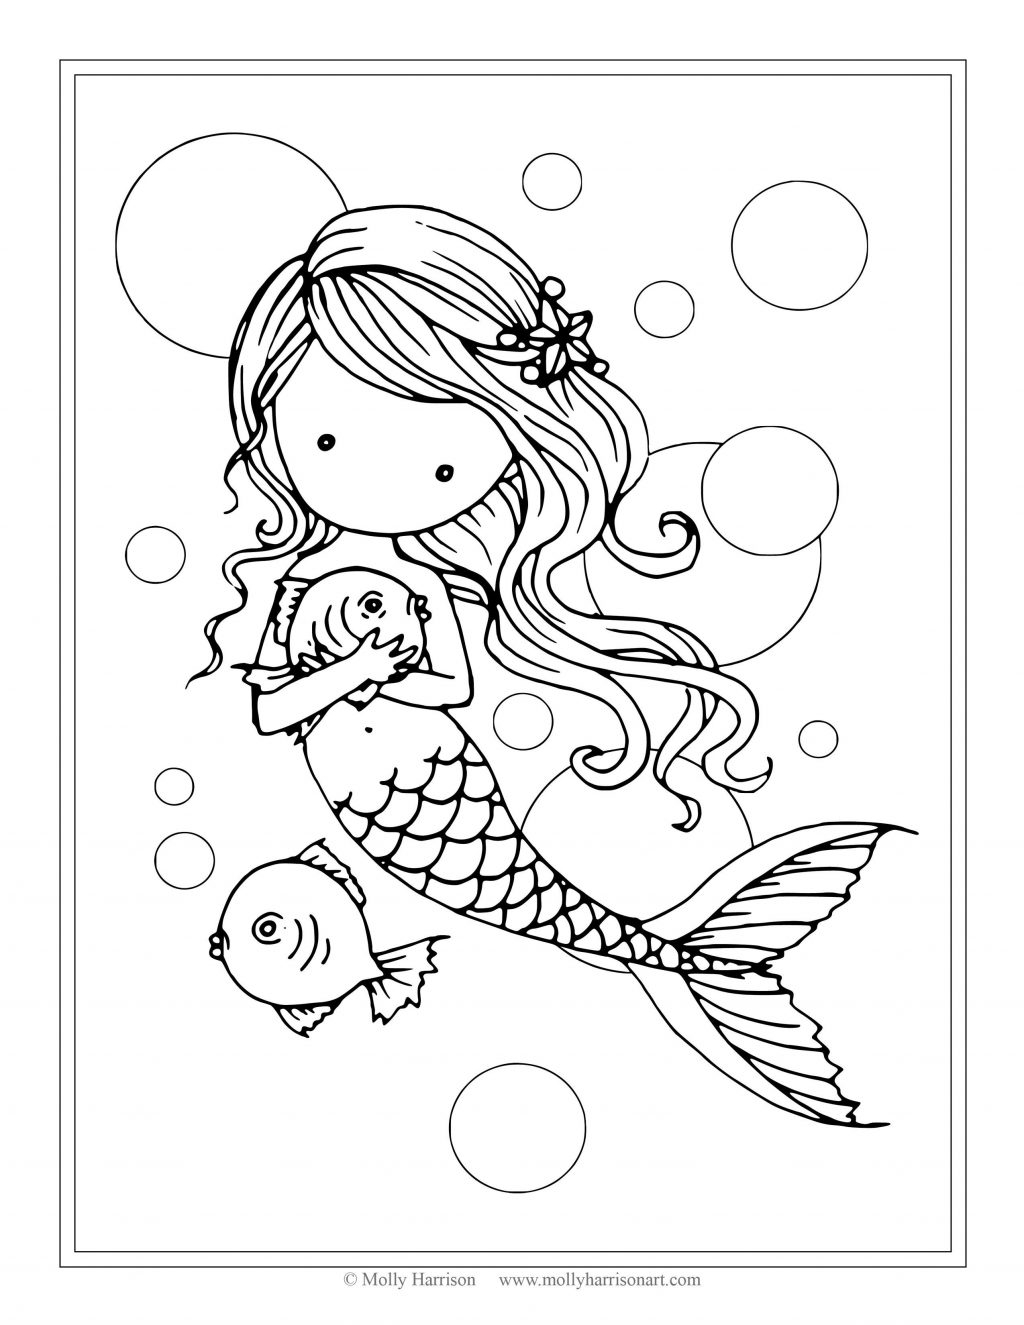 Free Ariel Coloring Pages Coloring Page Destiny Free Mermaid Coloring Pages With Fish Page